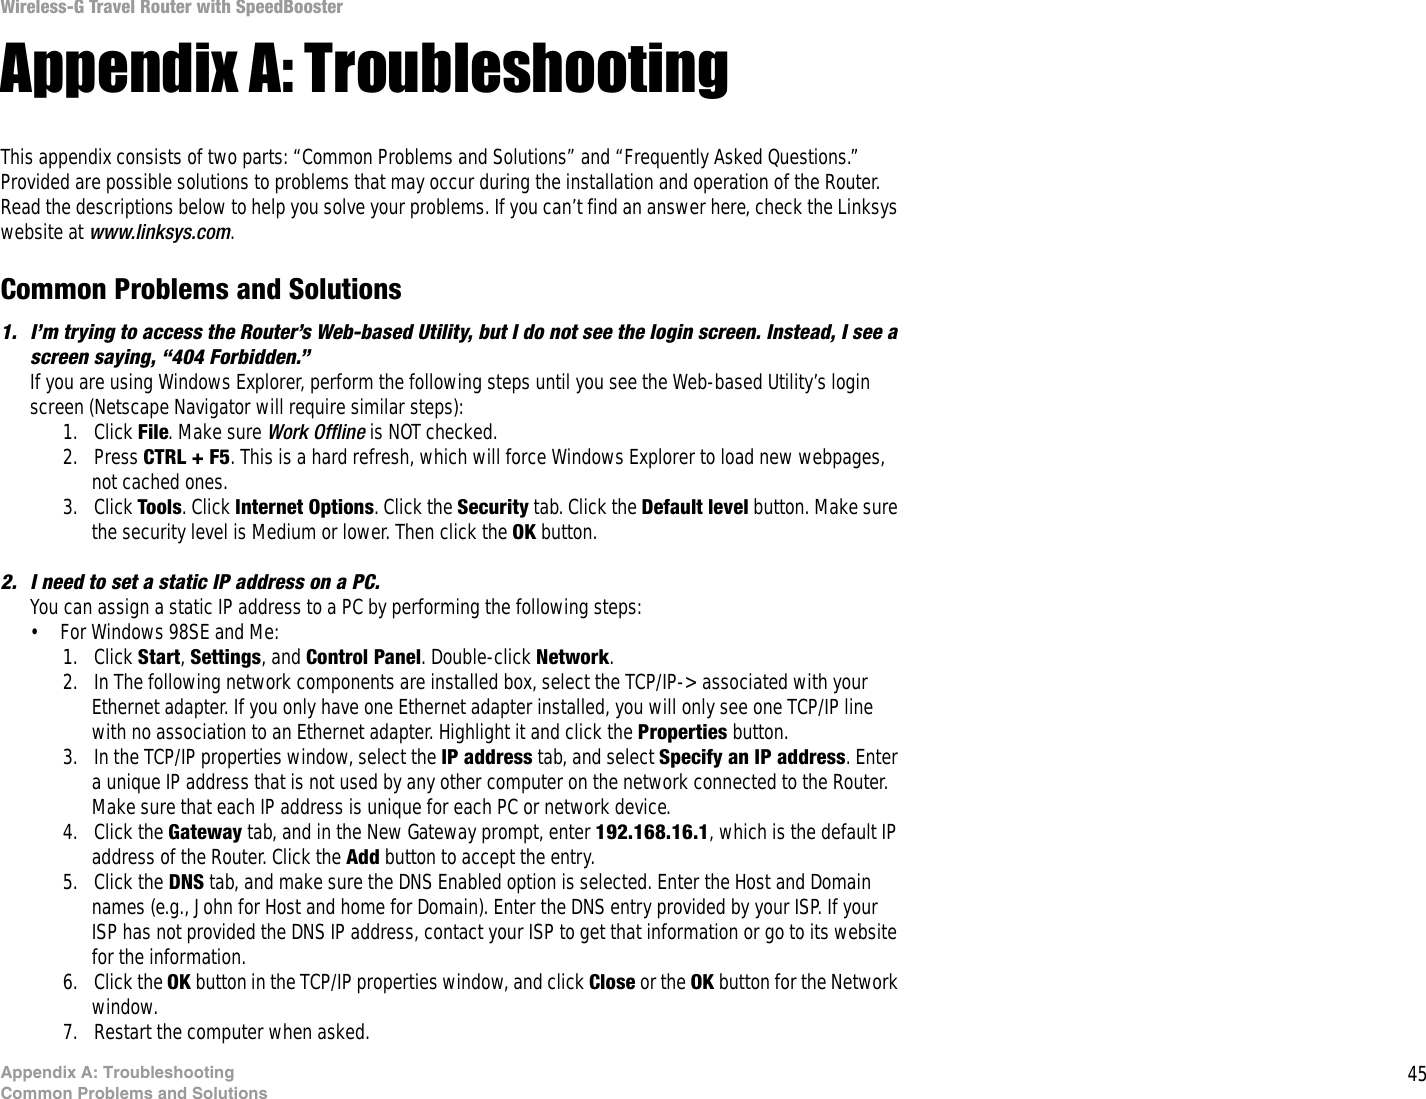 45Appendix A: TroubleshootingCommon Problems and SolutionsWireless-G Travel Router with SpeedBoosterAppendix A: TroubleshootingThis appendix consists of two parts: “Common Problems and Solutions” and “Frequently Asked Questions.” Provided are possible solutions to problems that may occur during the installation and operation of the Router. Read the descriptions below to help you solve your problems. If you can’t find an answer here, check the Linksys website at www.linksys.com.Common Problems and Solutions1. I’m trying to access the Router’s Web-based Utility, but I do not see the login screen. Instead, I see a screen saying, “404 Forbidden.”If you are using Windows Explorer, perform the following steps until you see the Web-based Utility’s login screen (Netscape Navigator will require similar steps):1. Click File. Make sure Work Offline is NOT checked.2. Press CTRL + F5. This is a hard refresh, which will force Windows Explorer to load new webpages, not cached ones.3. Click Tools. Click Internet Options. Click the Security tab. Click the Default level button. Make sure the security level is Medium or lower. Then click the OK button.2. I need to set a static IP address on a PC.You can assign a static IP address to a PC by performing the following steps:• For Windows 98SE and Me:1. Click Start, Settings, and Control Panel. Double-click Network.2. In The following network components are installed box, select the TCP/IP-&gt; associated with your Ethernet adapter. If you only have one Ethernet adapter installed, you will only see one TCP/IP line with no association to an Ethernet adapter. Highlight it and click the Properties button.3. In the TCP/IP properties window, select the IP address tab, and select Specify an IP address. Enter a unique IP address that is not used by any other computer on the network connected to the Router. Make sure that each IP address is unique for each PC or network device.4. Click the Gateway tab, and in the New Gateway prompt, enter 192.168.16.1, which is the default IP address of the Router. Click the Add button to accept the entry.5. Click the DNS tab, and make sure the DNS Enabled option is selected. Enter the Host and Domain names (e.g., John for Host and home for Domain). Enter the DNS entry provided by your ISP. If your ISP has not provided the DNS IP address, contact your ISP to get that information or go to its website for the information.6. Click the OK button in the TCP/IP properties window, and click Close or the OK button for the Network window.7. Restart the computer when asked.